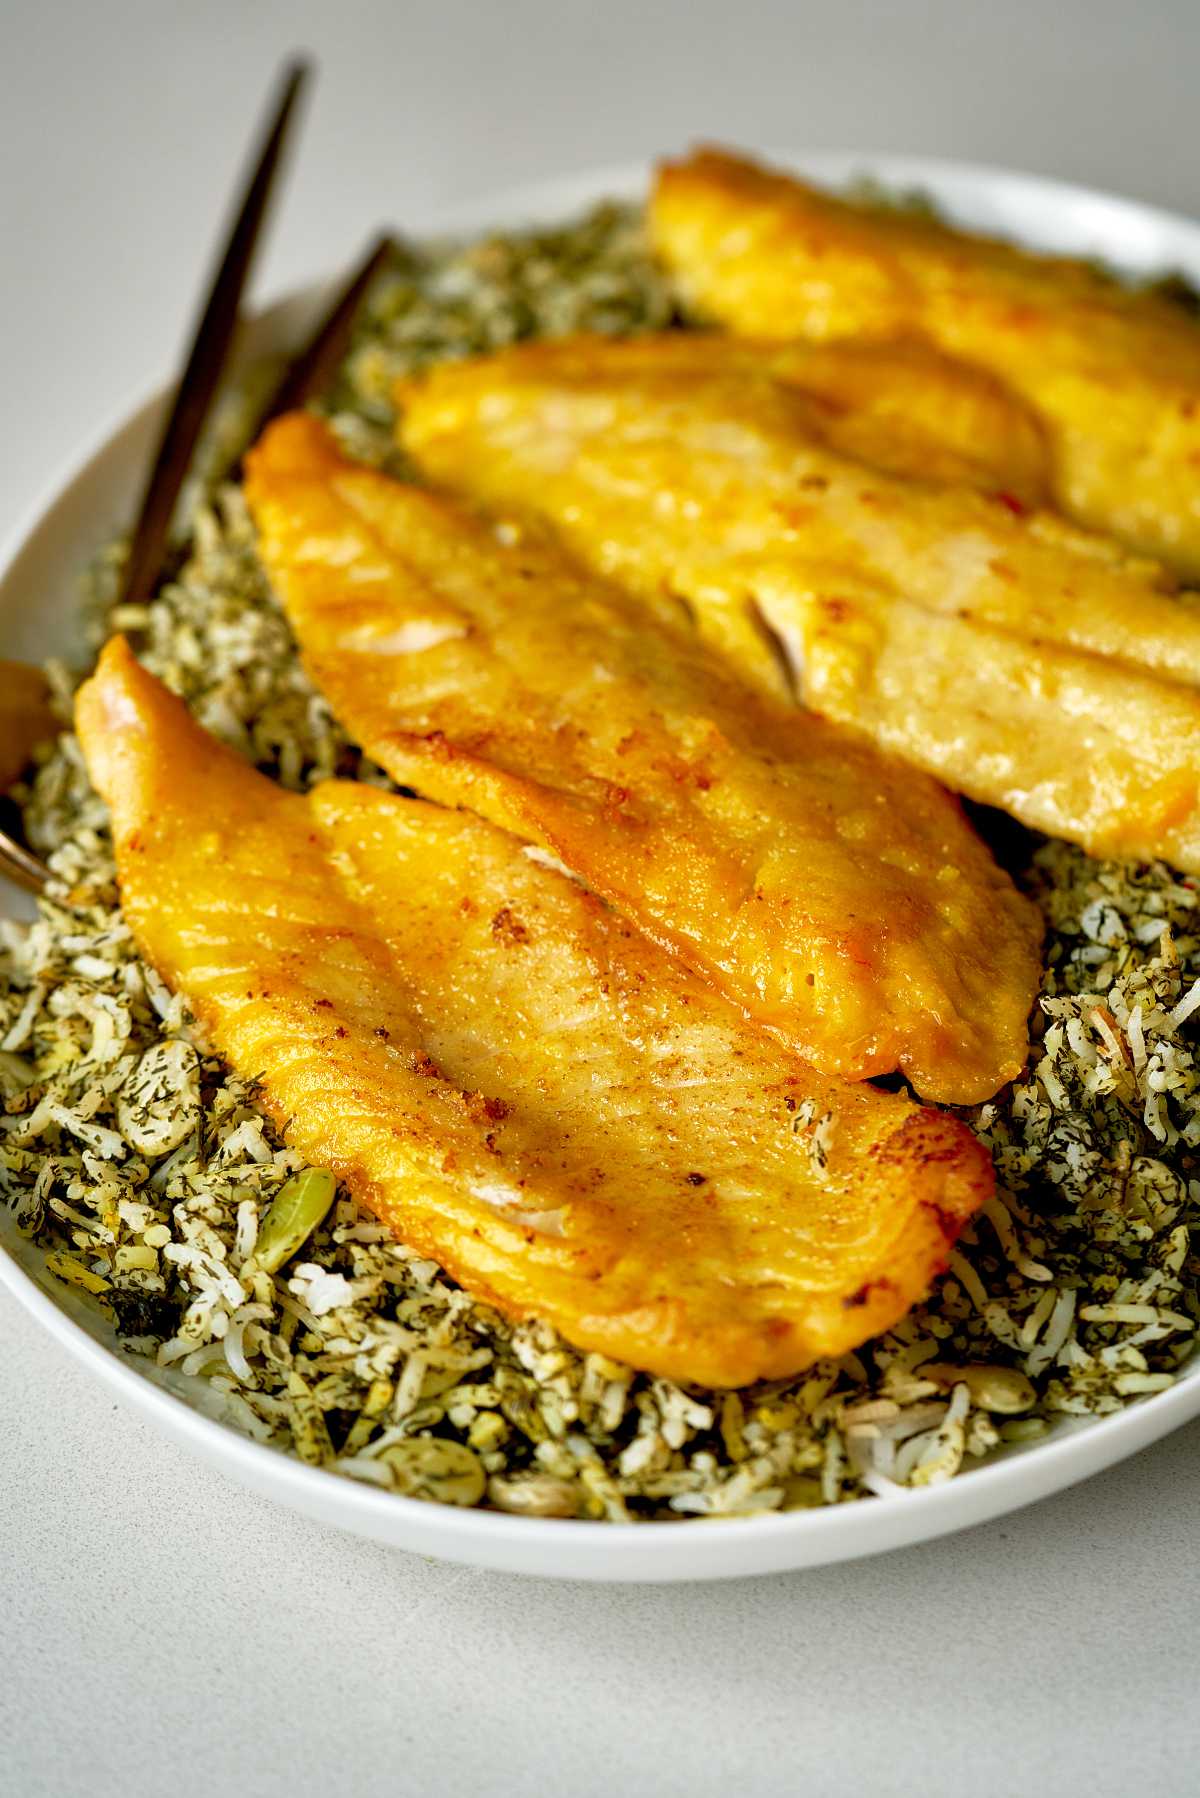 Fried fish on top of green rice.